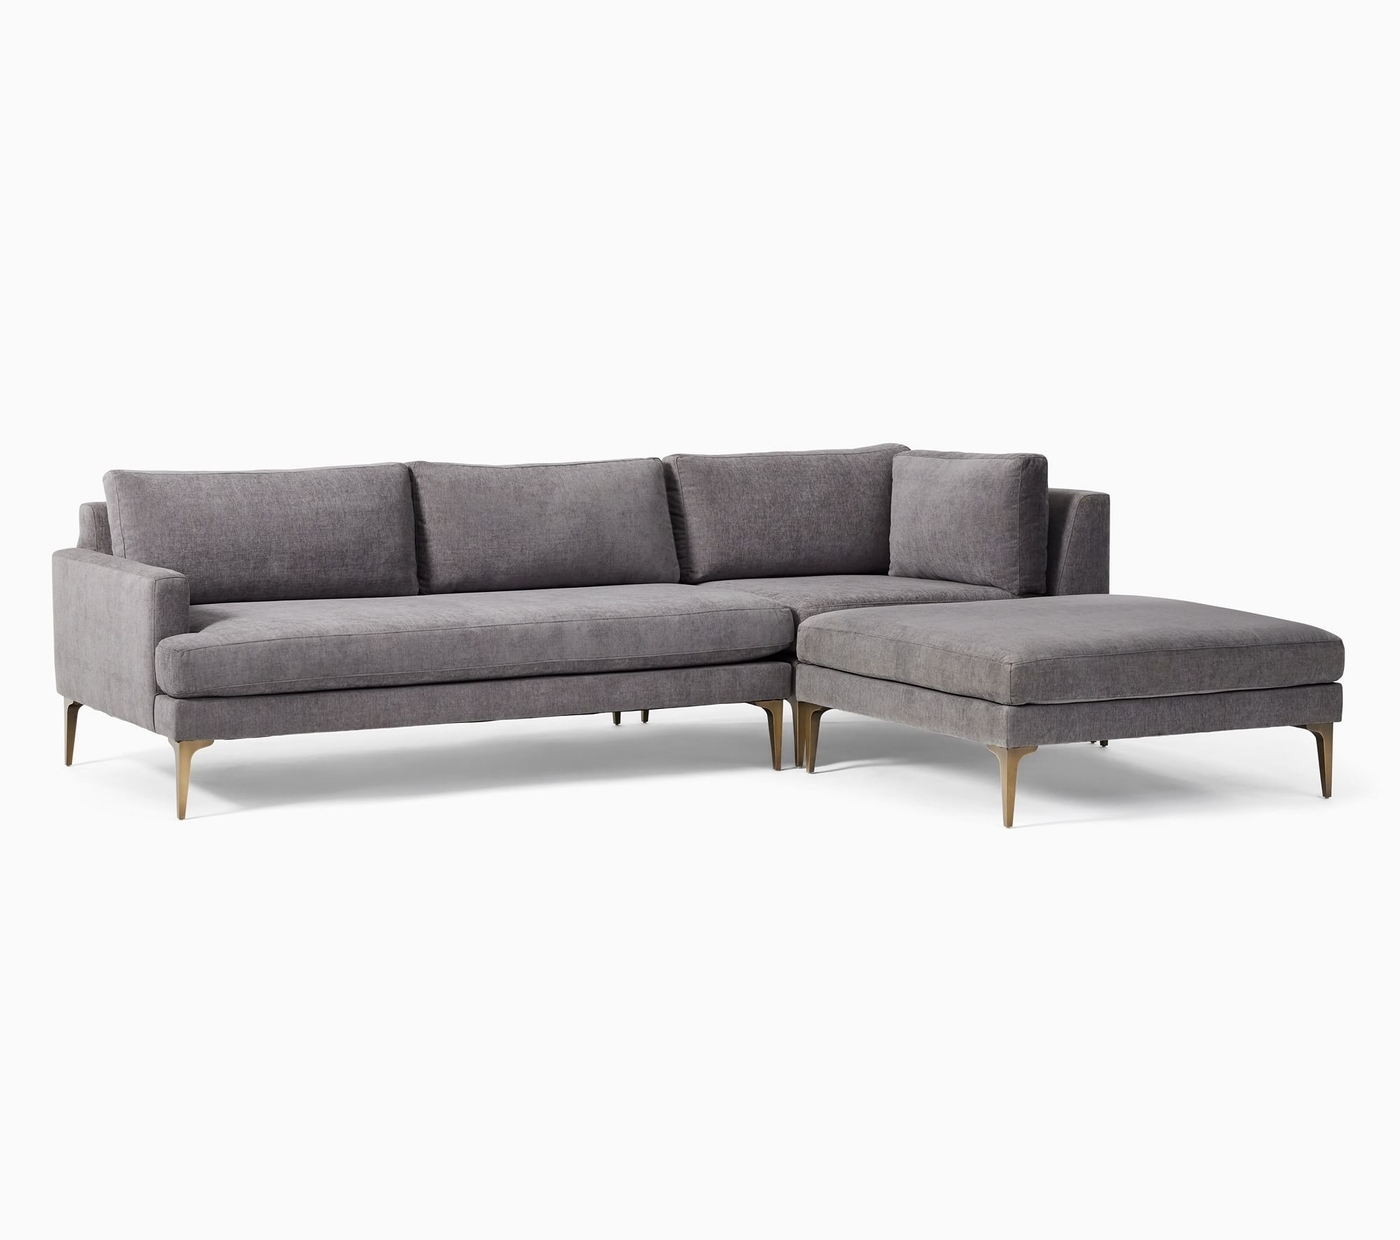 Andes 3 Piece Chaise Sectional, Sofa With Chaise